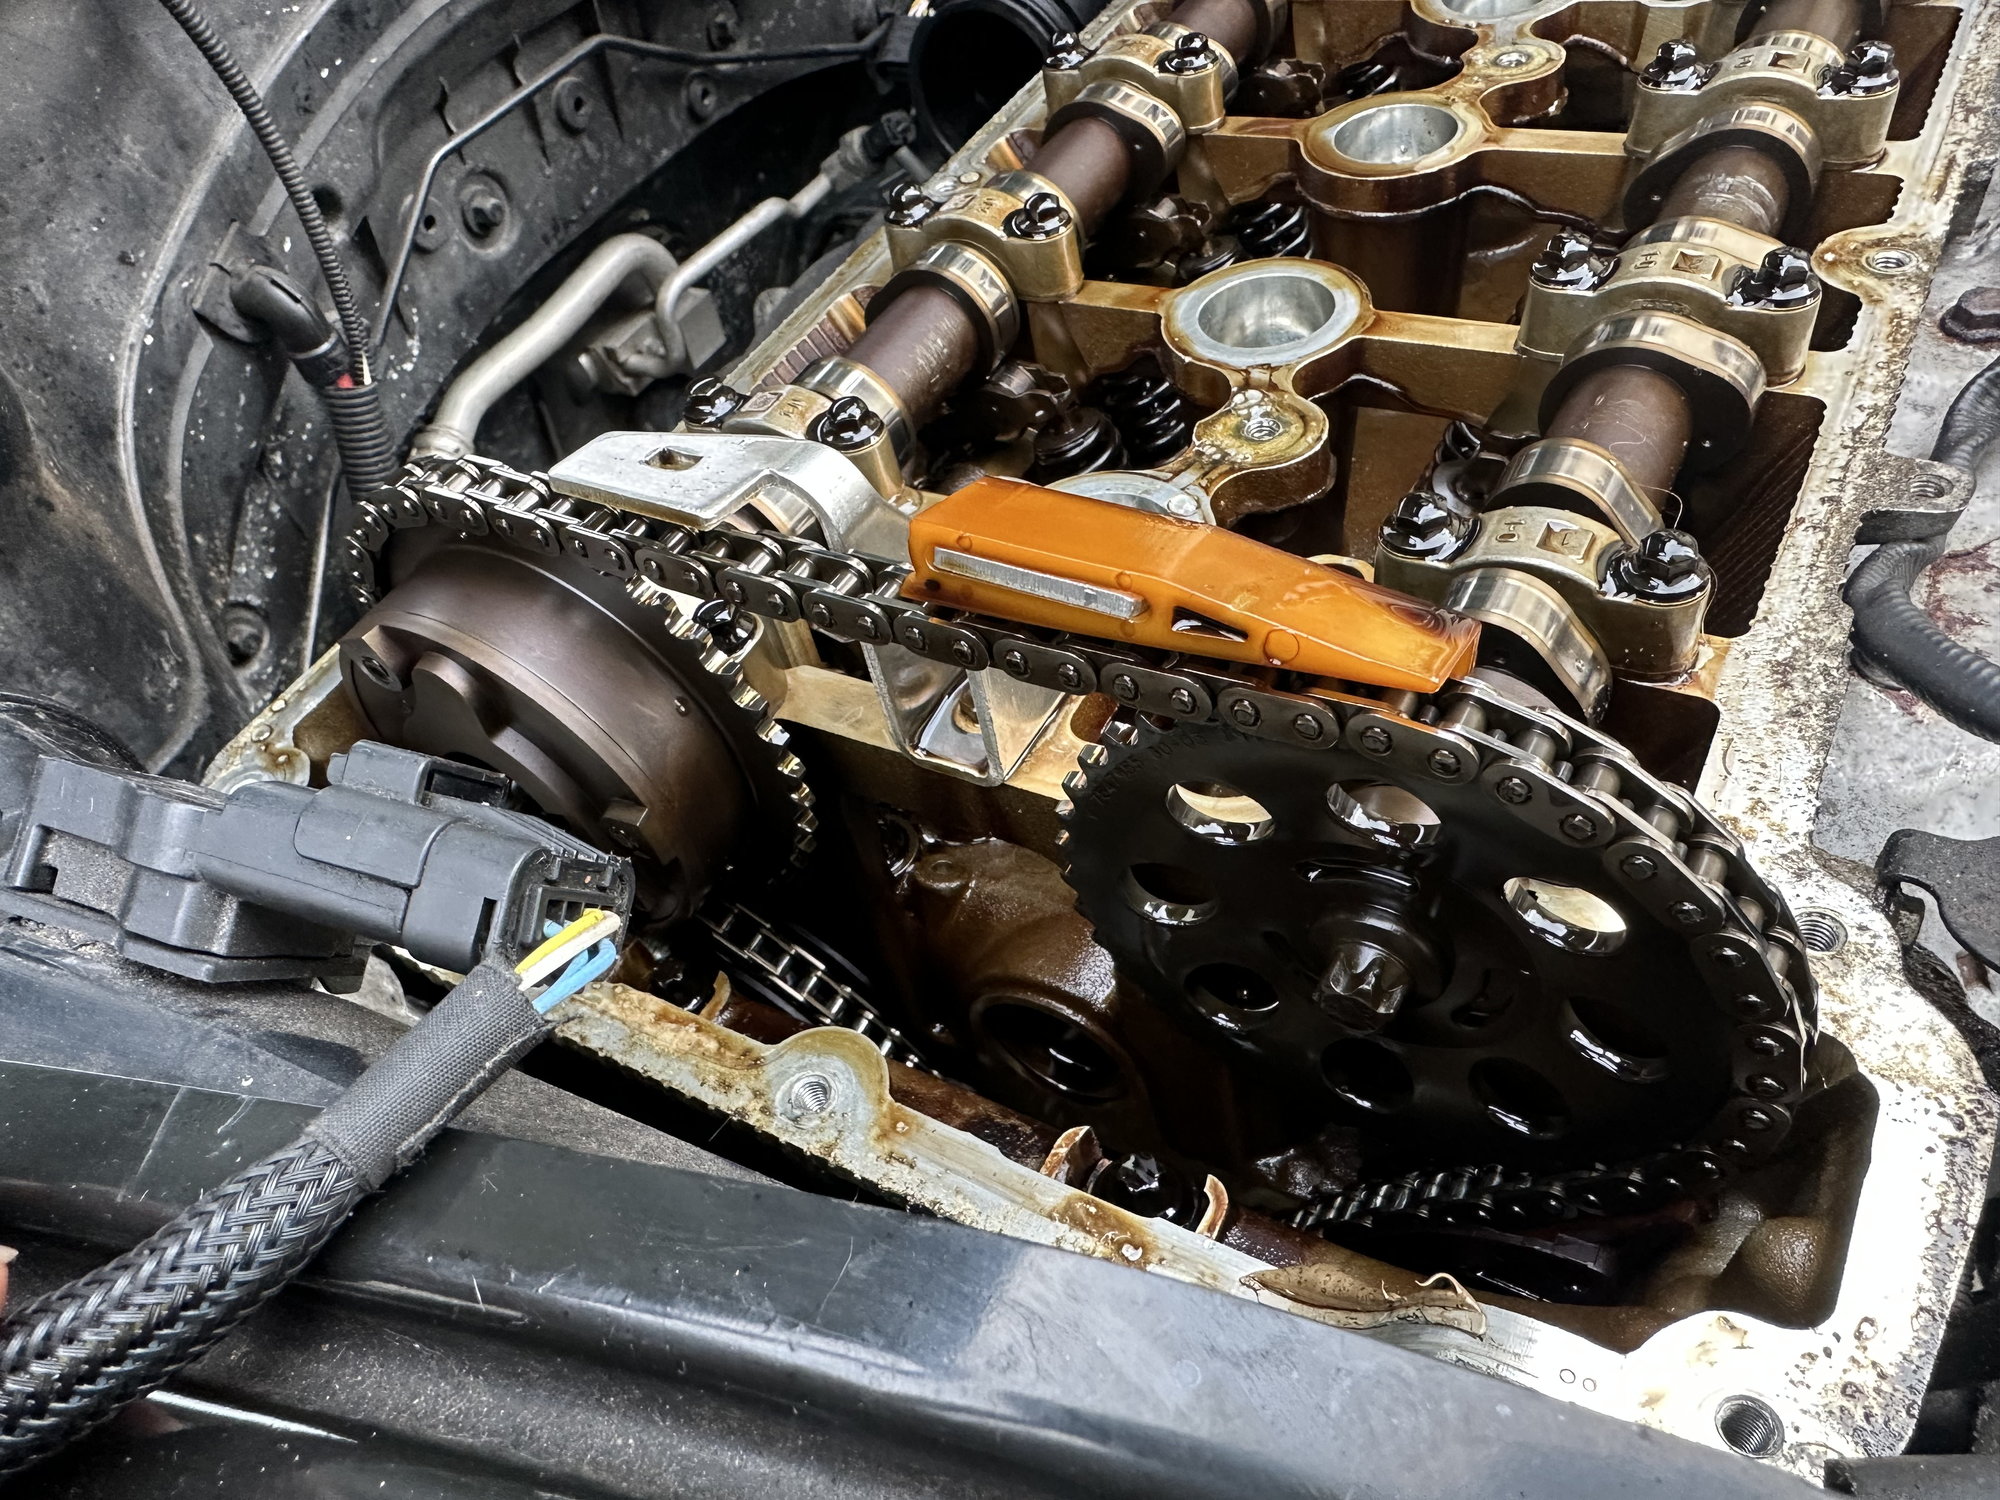 Mini R56 Timing Chain Replacement. Mini Cooper timing chain noise